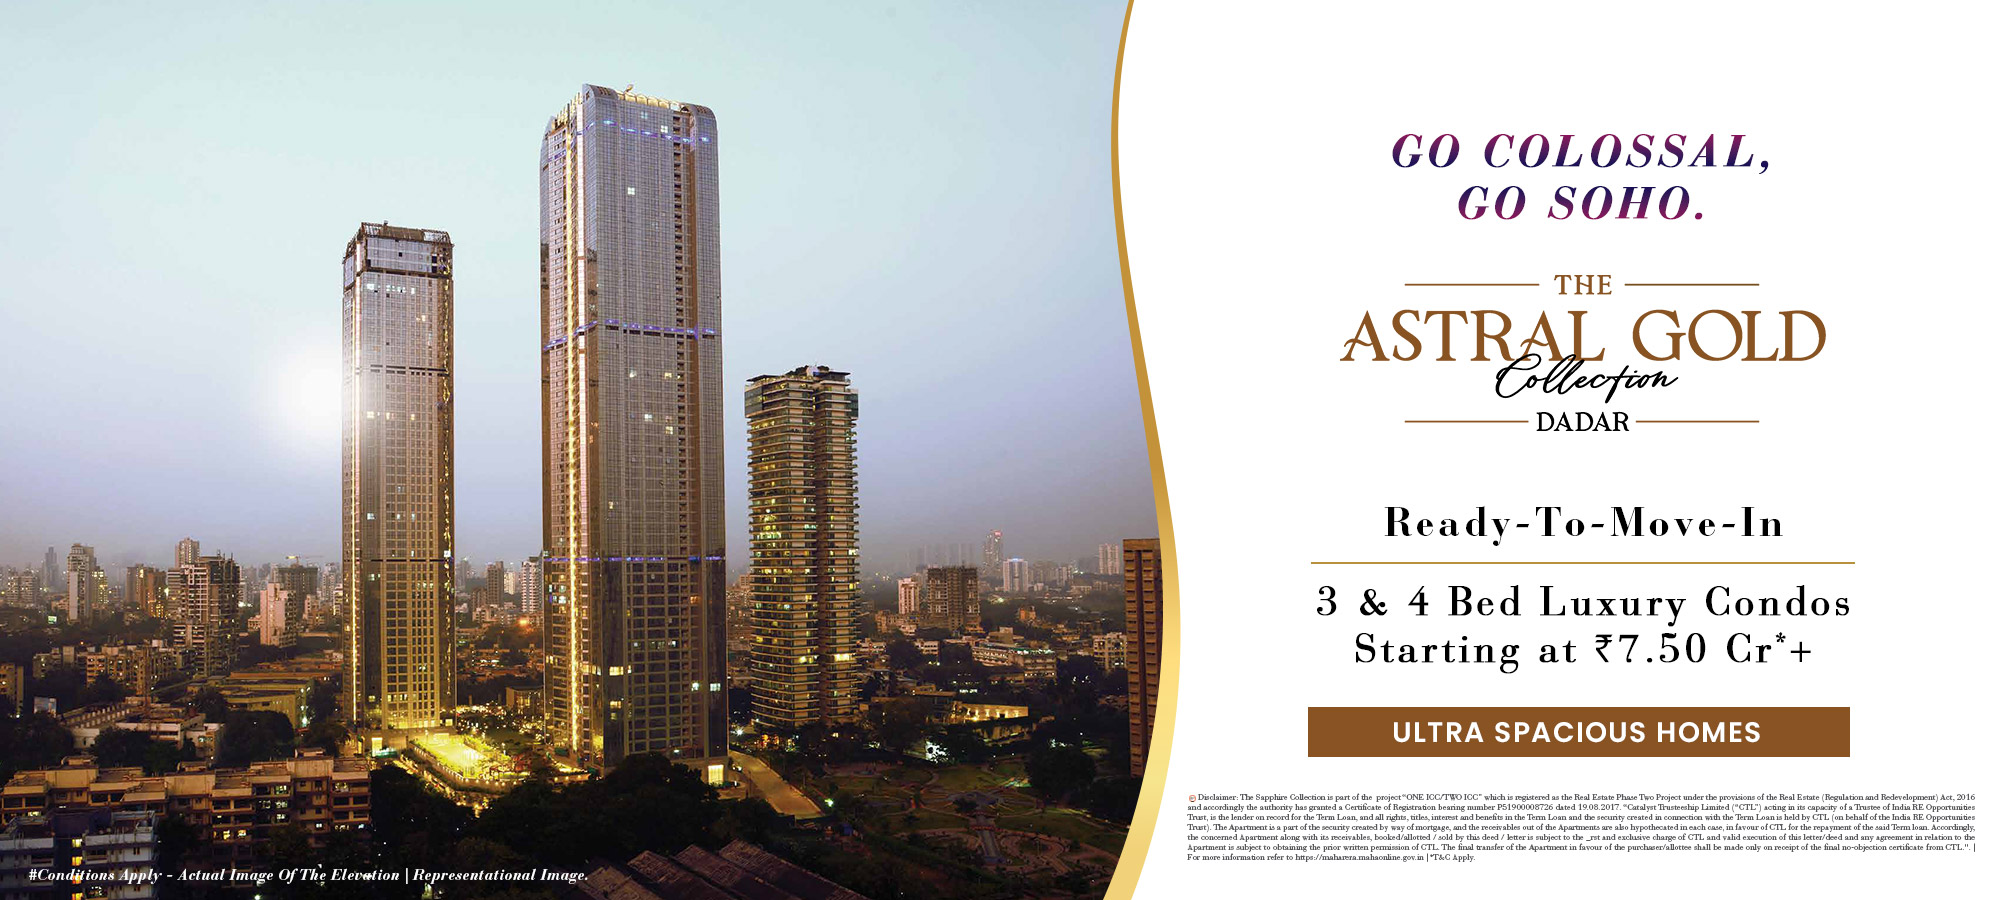 The Astral Collections ICC Dadar